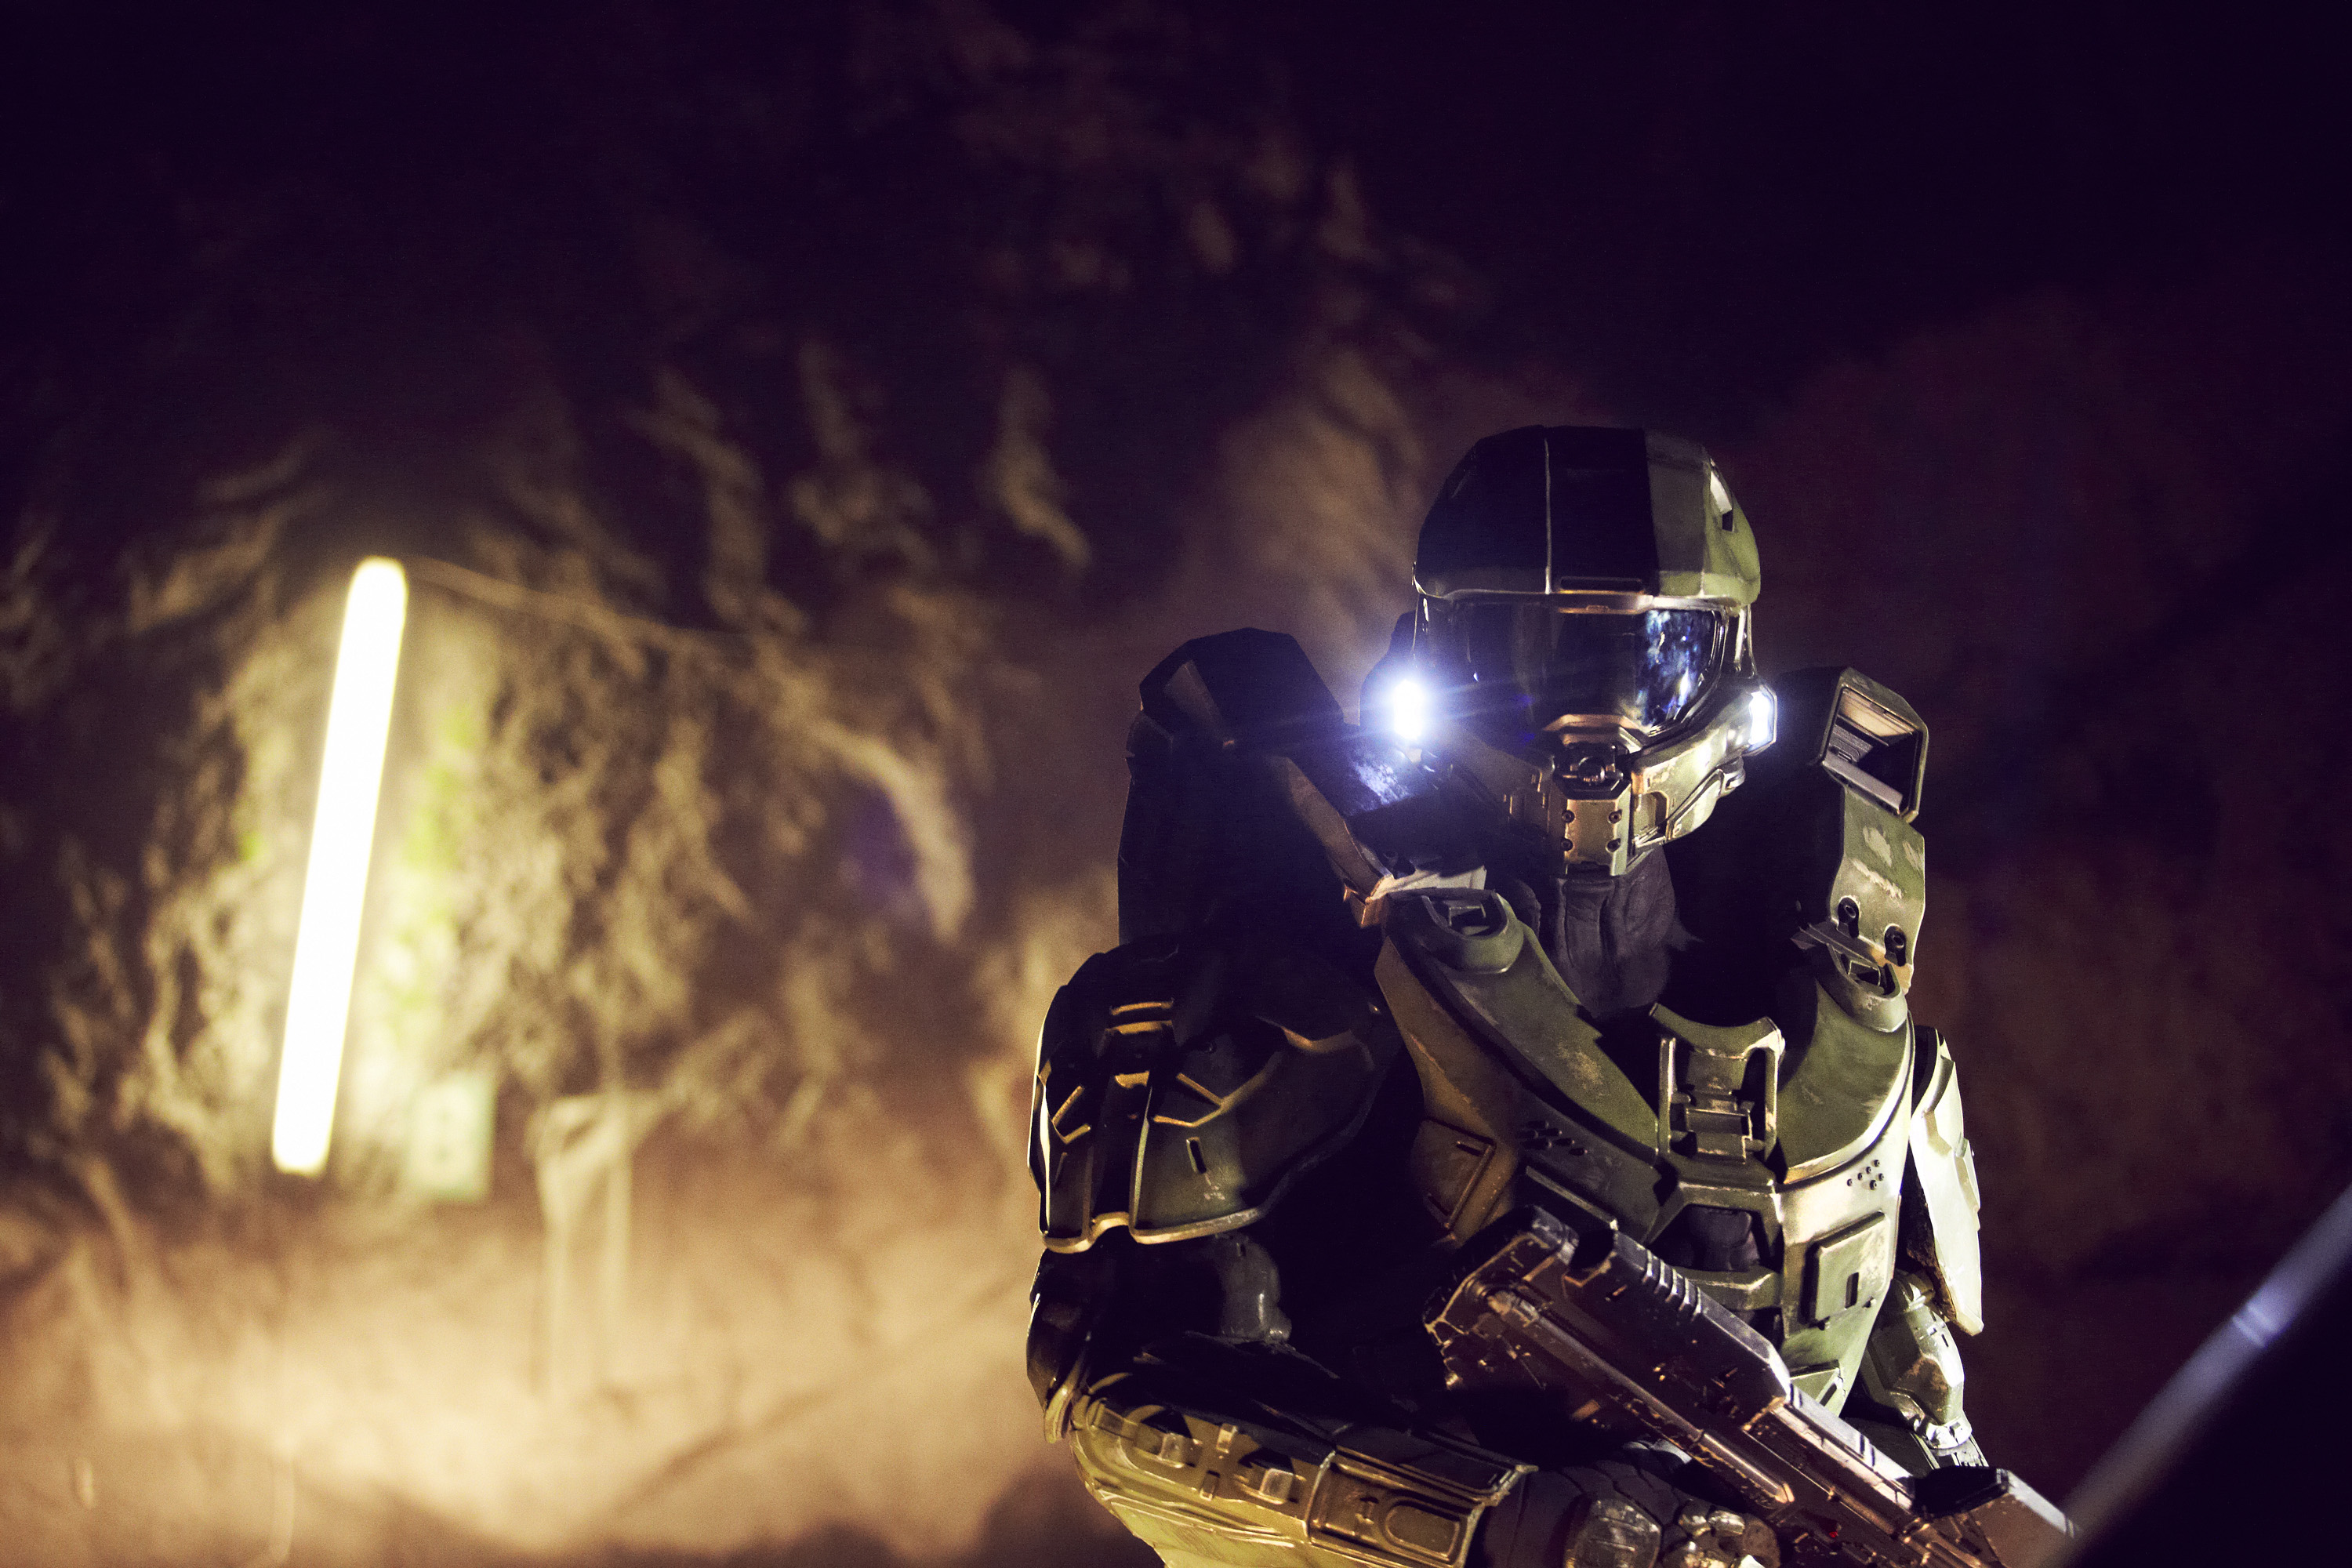 Halo' TV Series: How the Paramount+ Release Changes the Franchise